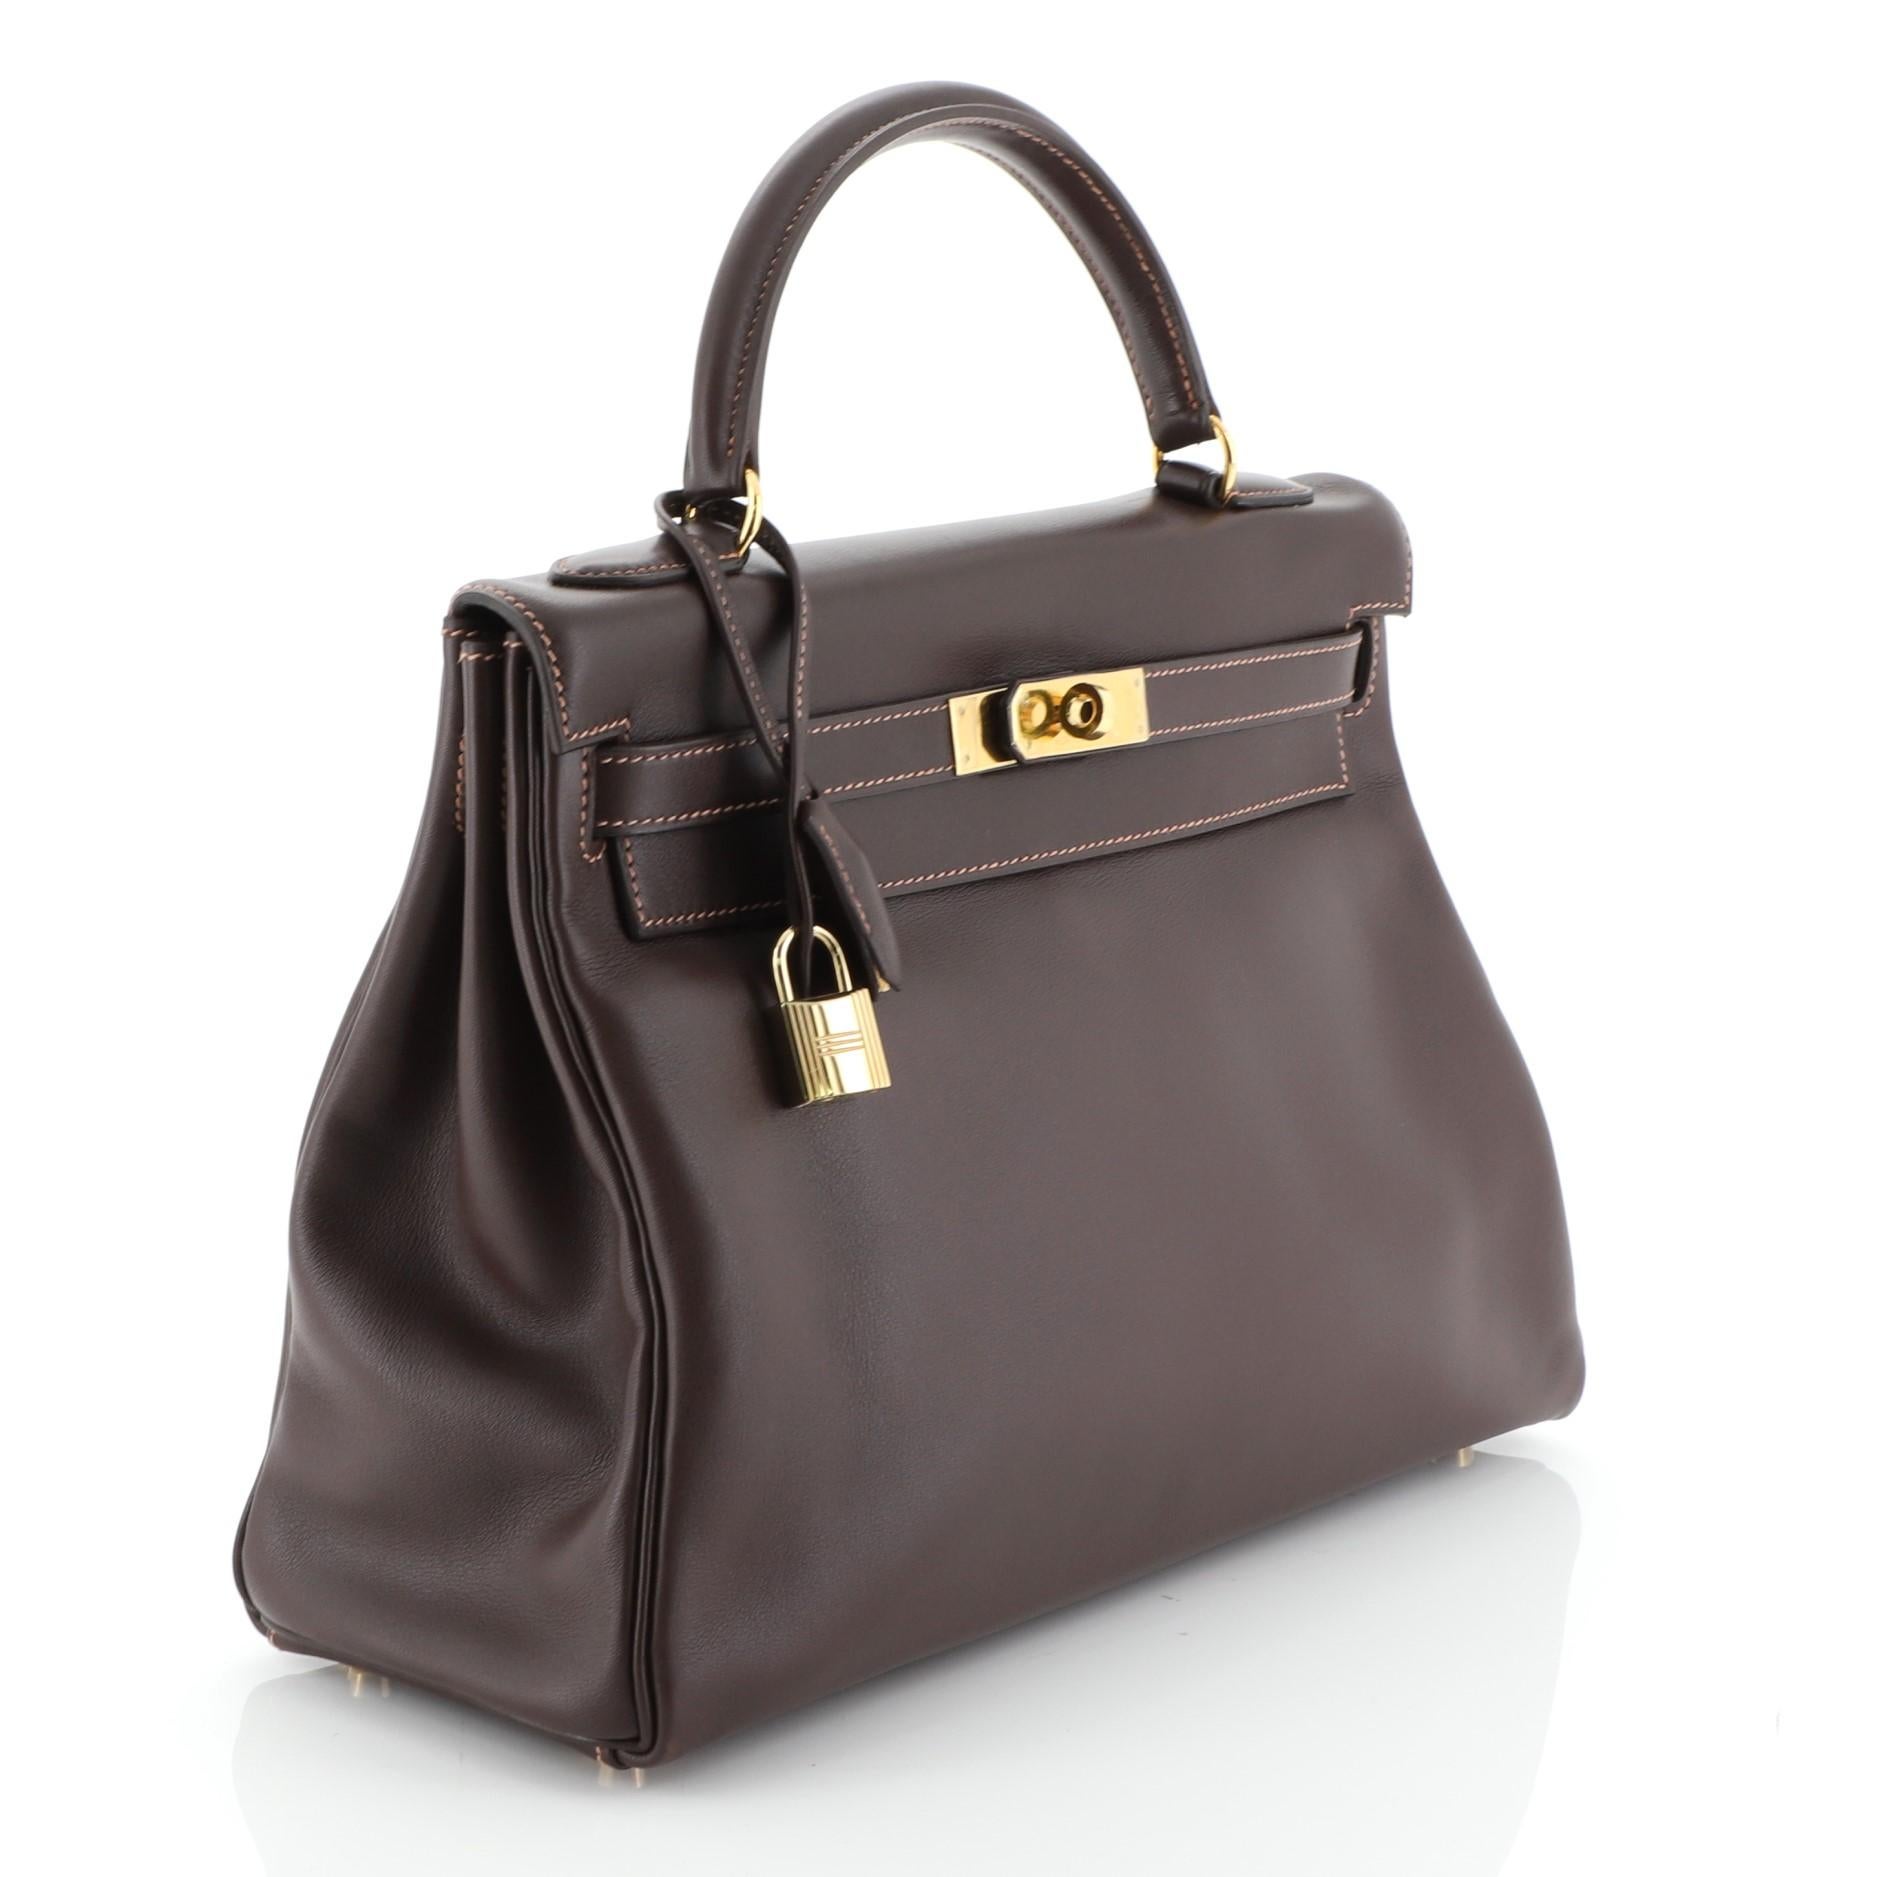 This Hermes Kelly Handbag Havane Gulliver with Gold Hardware 32, crafted in Havane brown Gulliver leather, features a single rolled top handle, protective base studs, and gold hardware. Its turn-lock closure opens to a Havane brown Gulliver leather